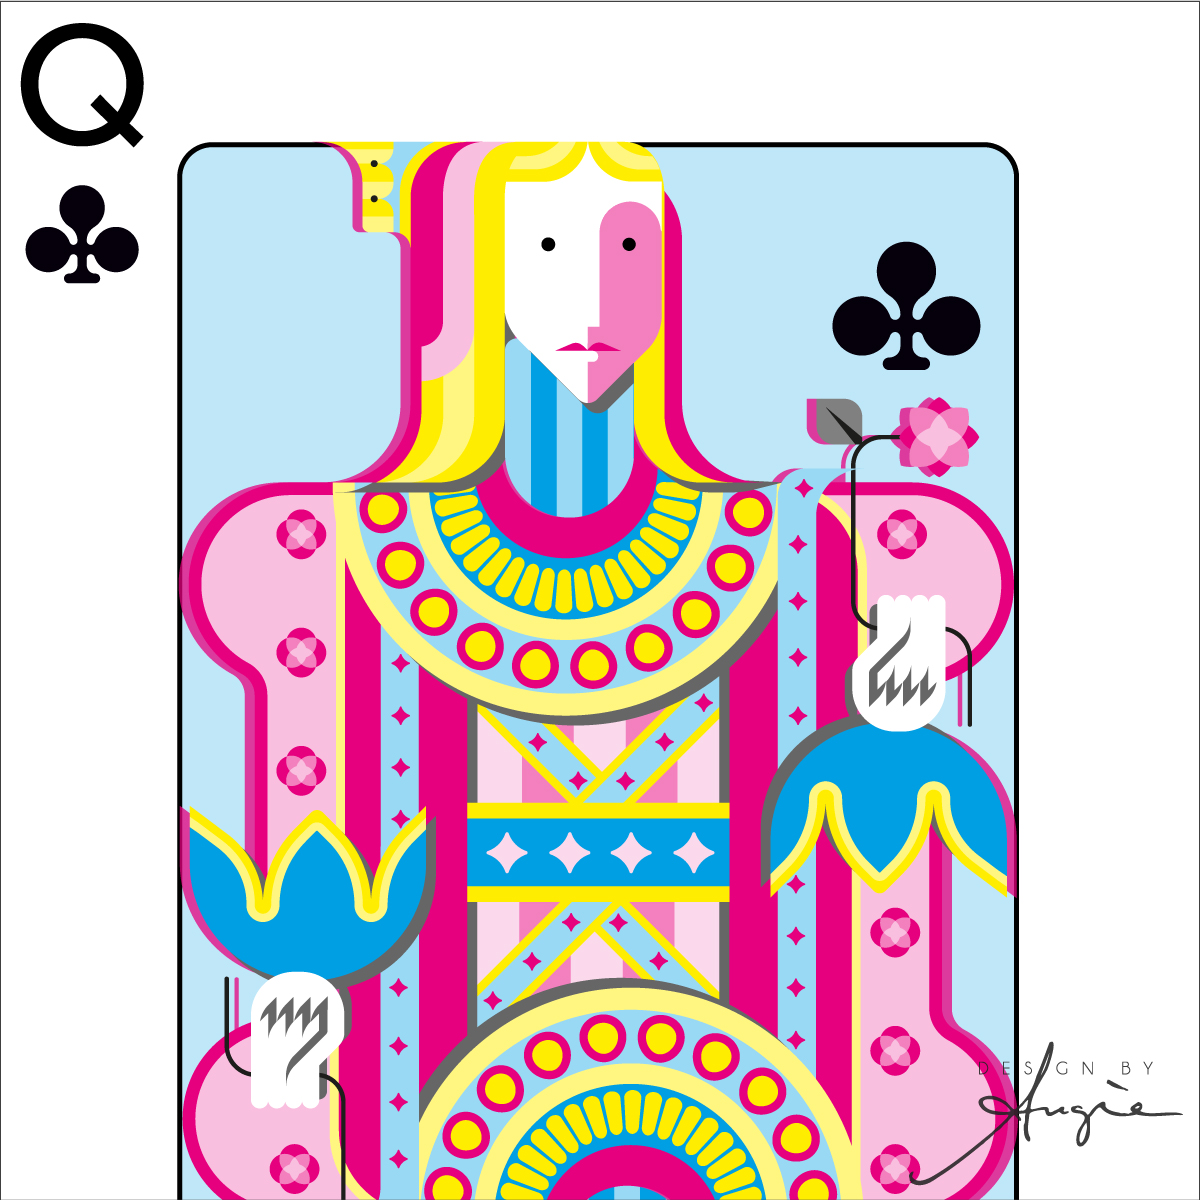 Queen of Clubs - The Card Game